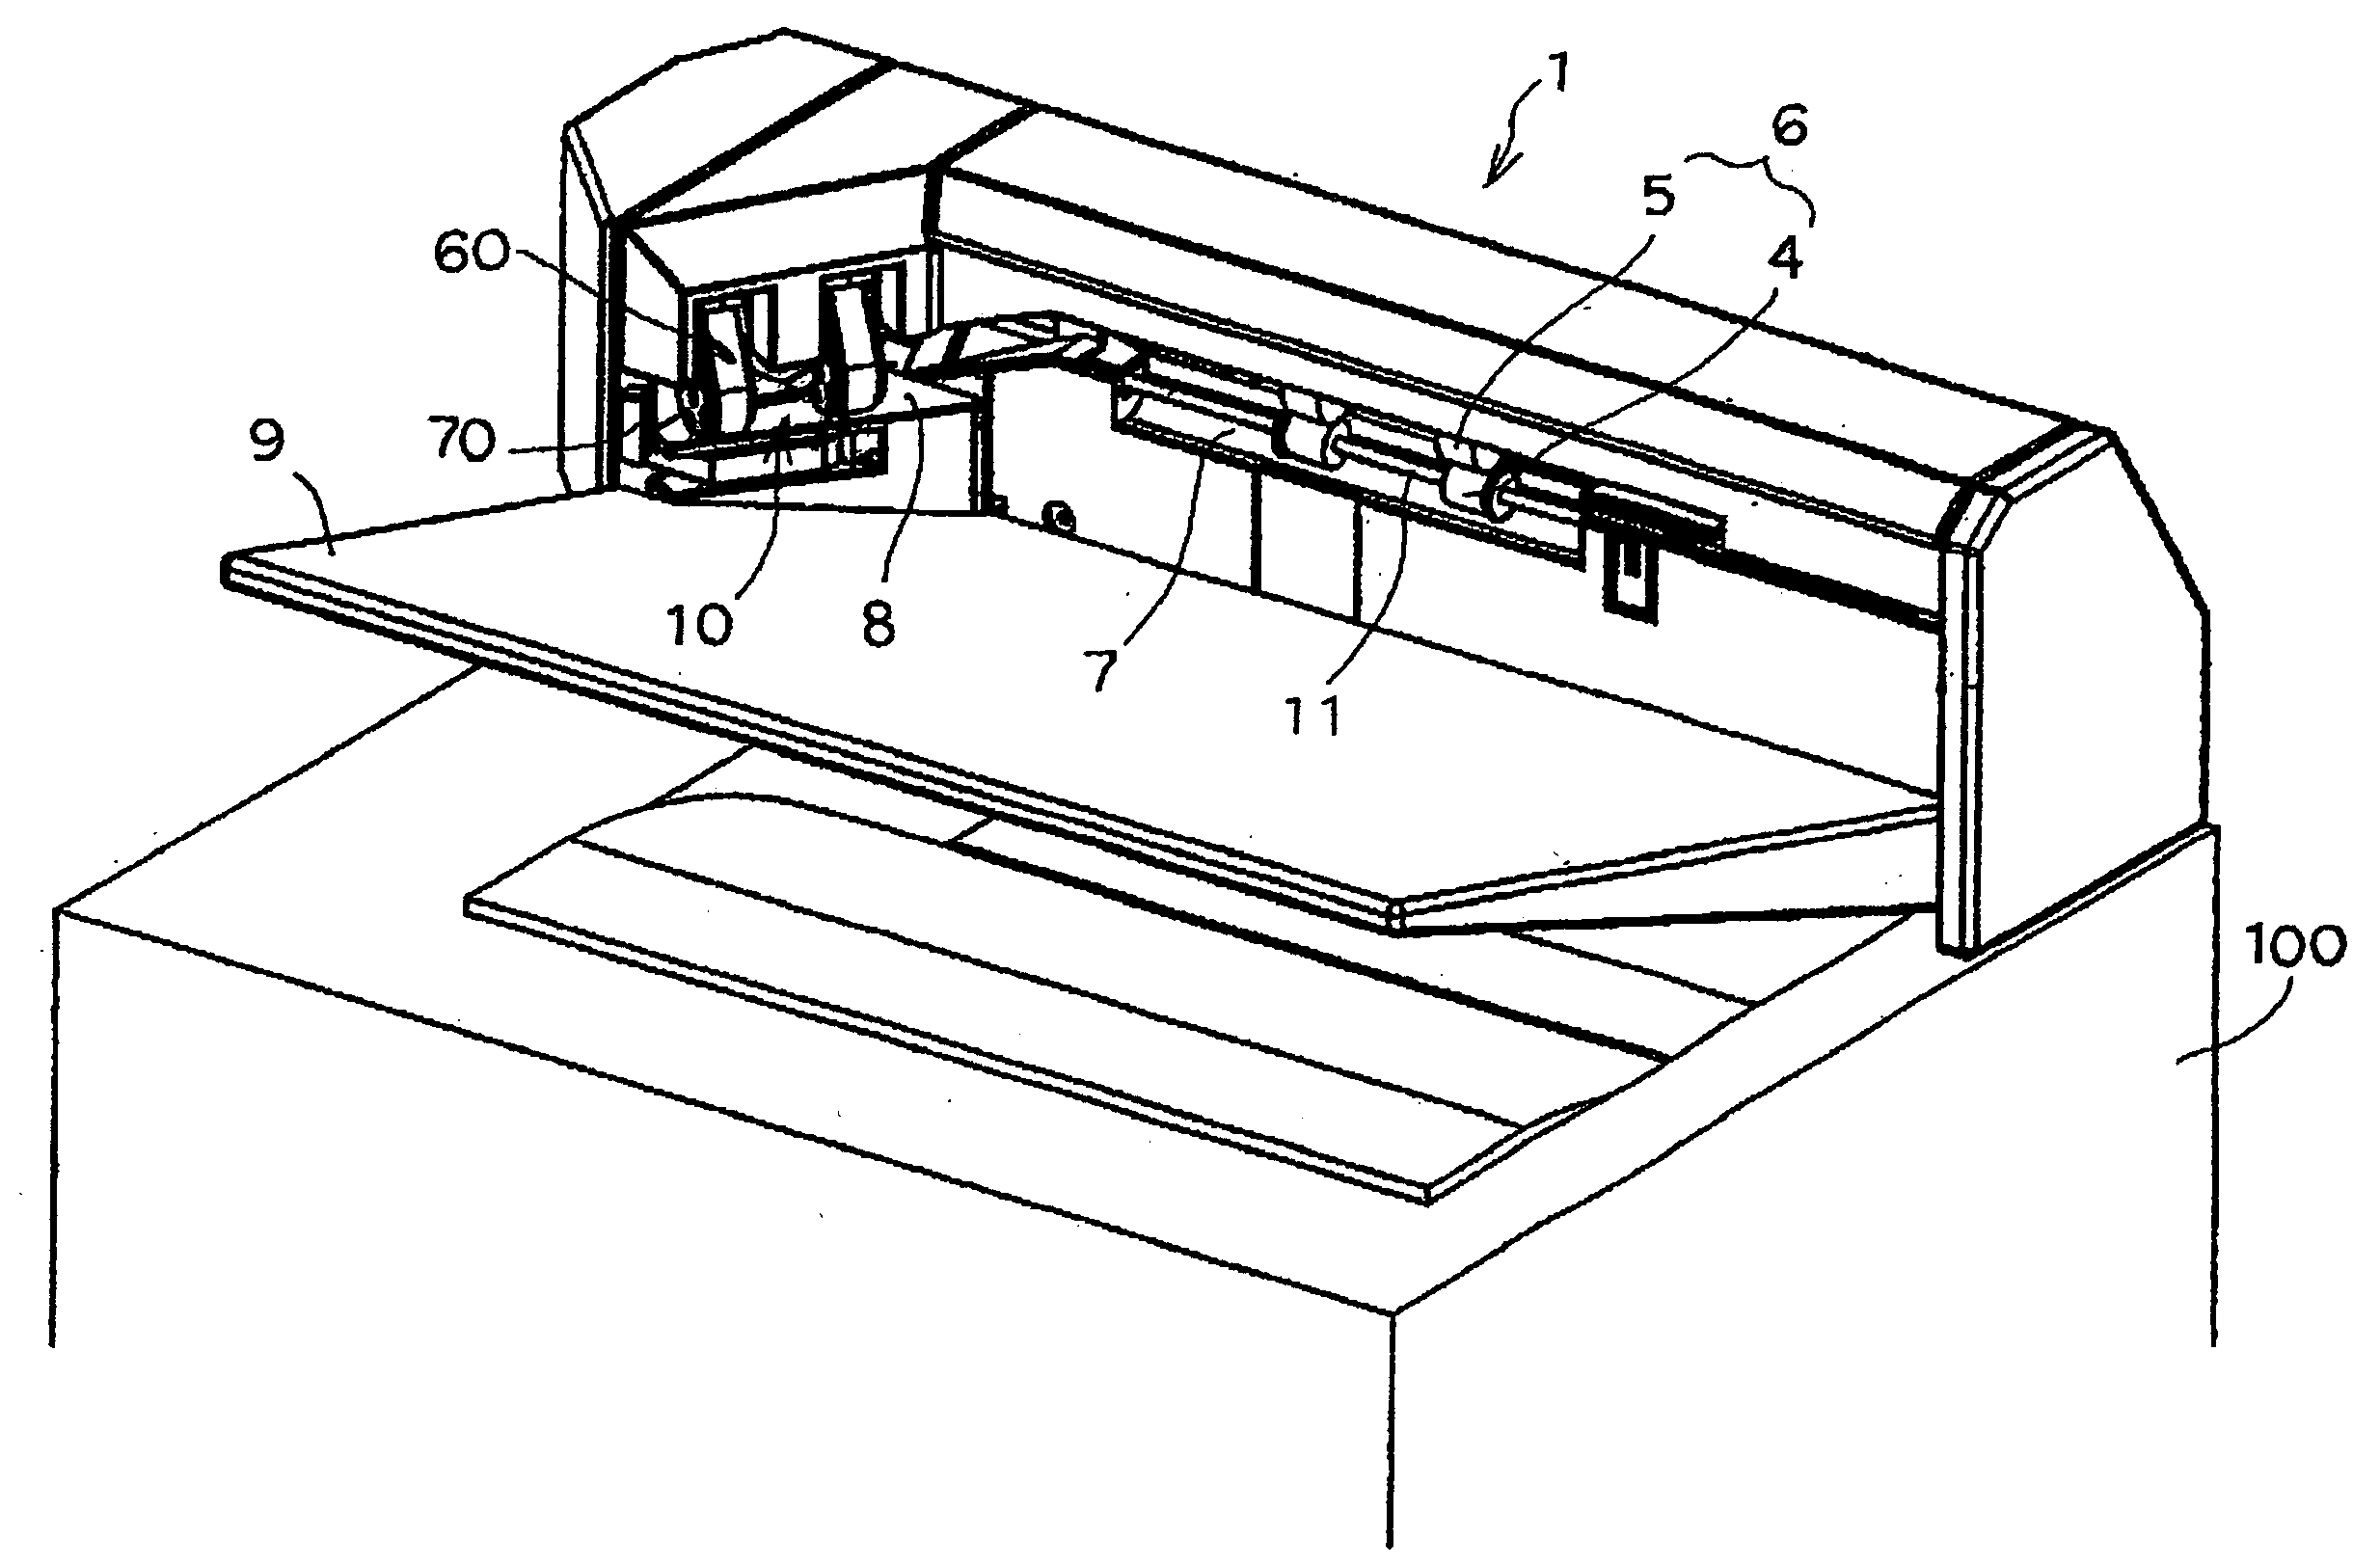 Sheet discharge apparatus with aligning member